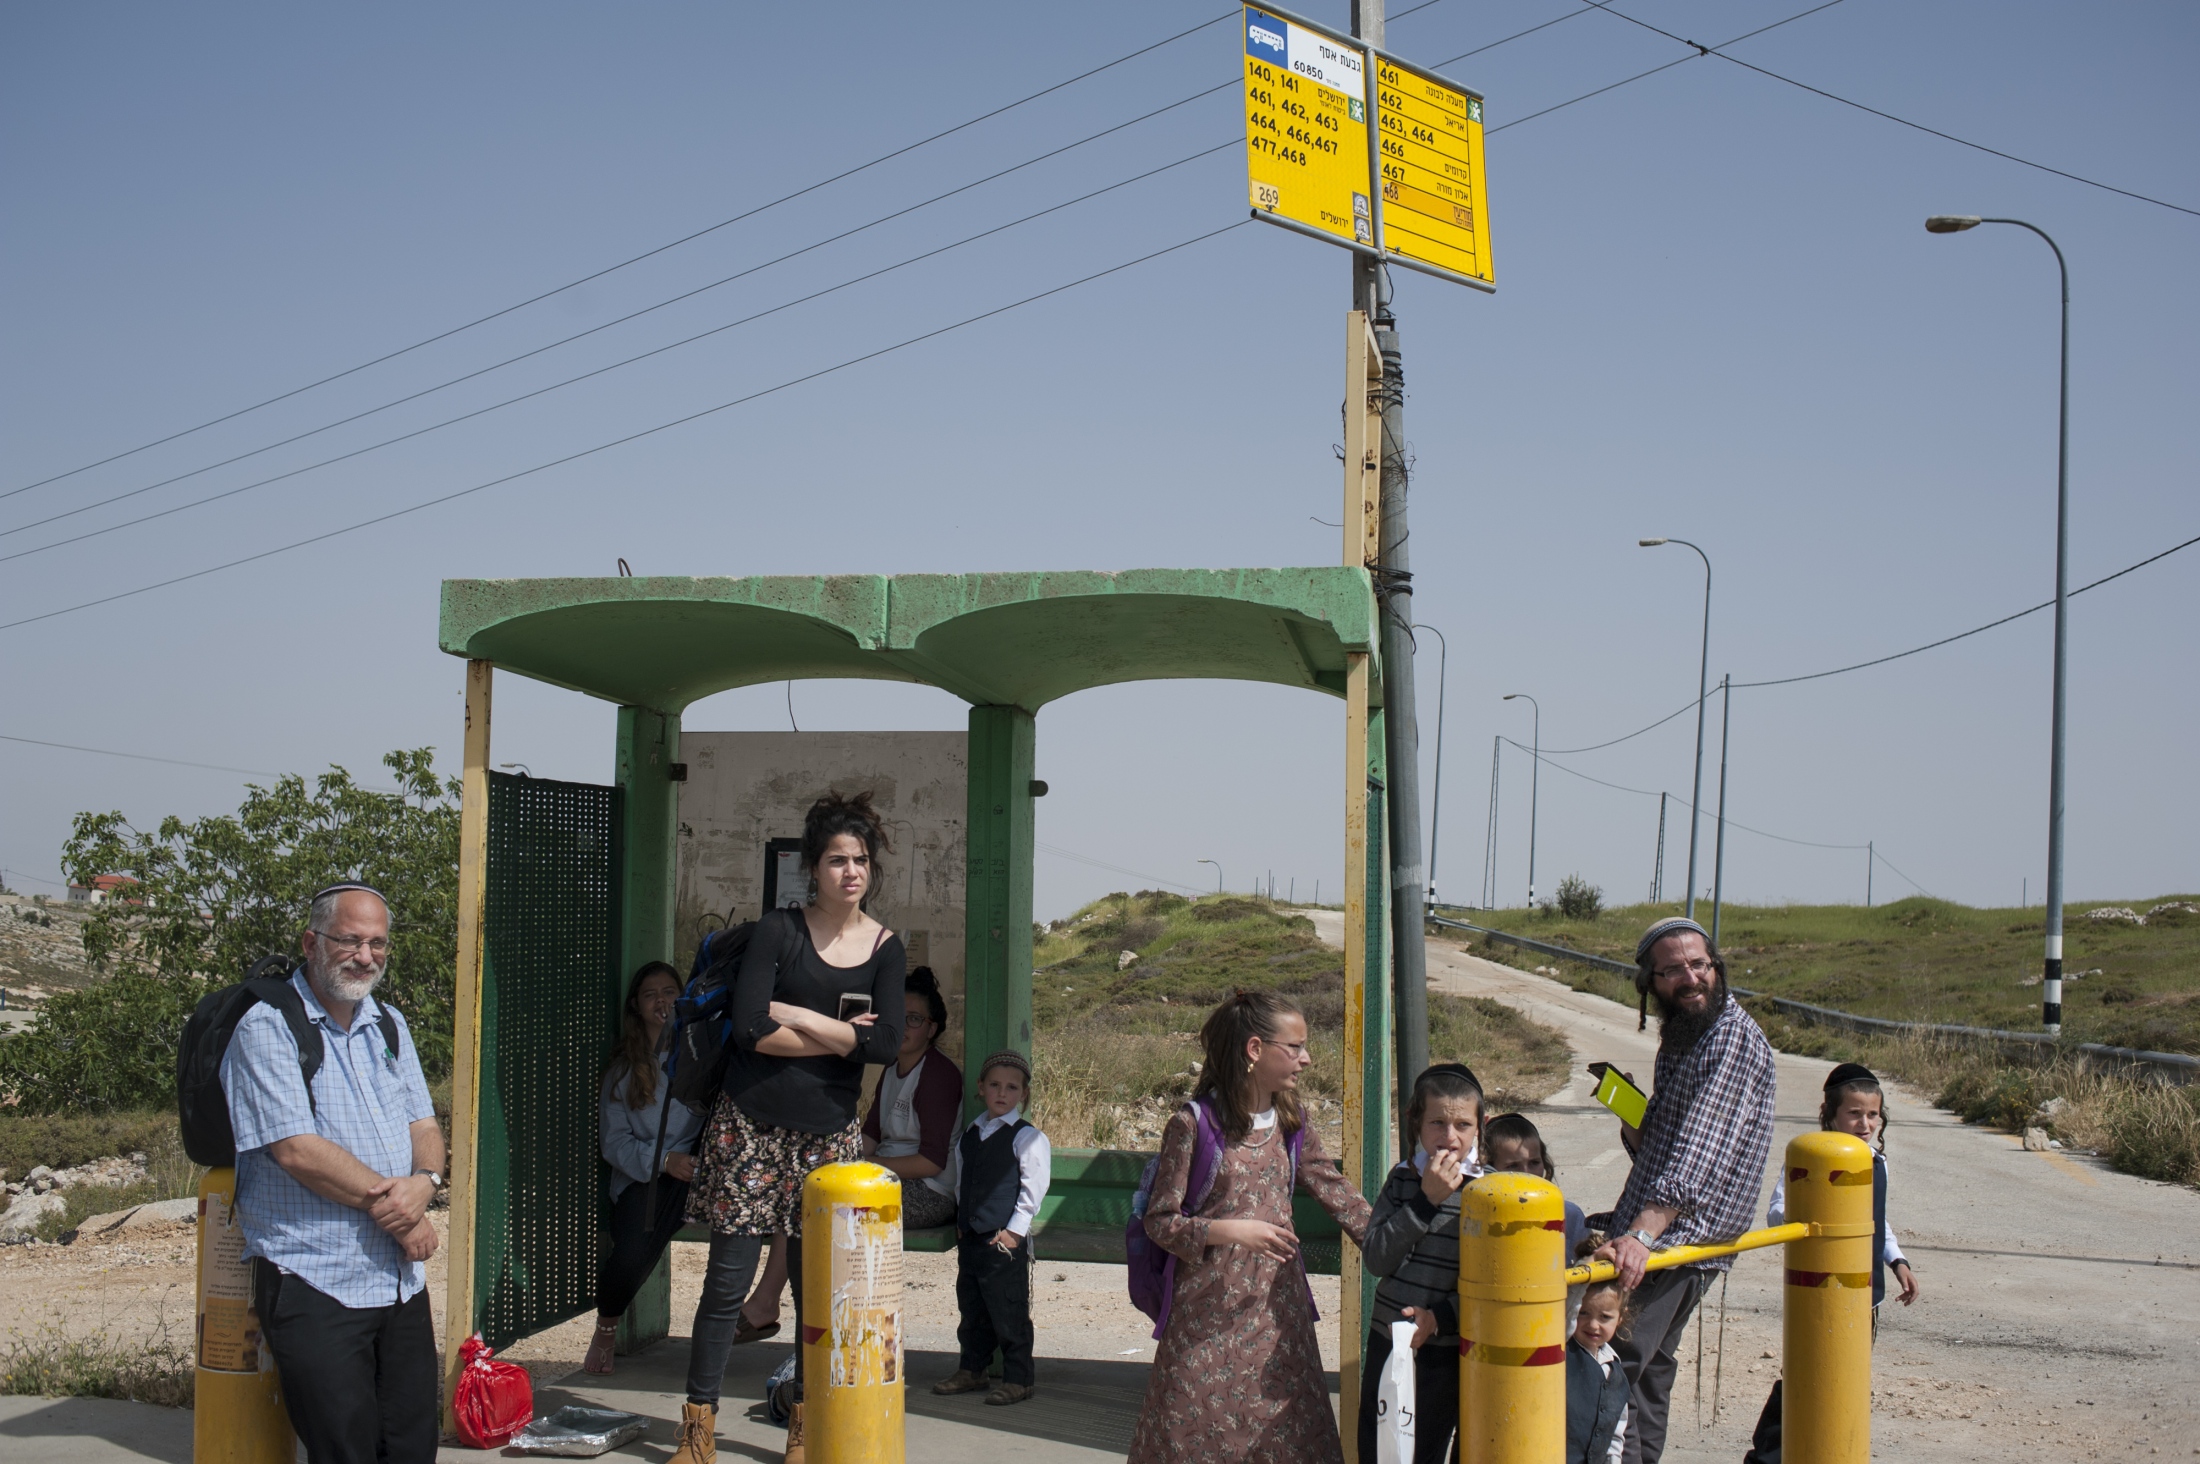 Hitchhiking in the West Bank